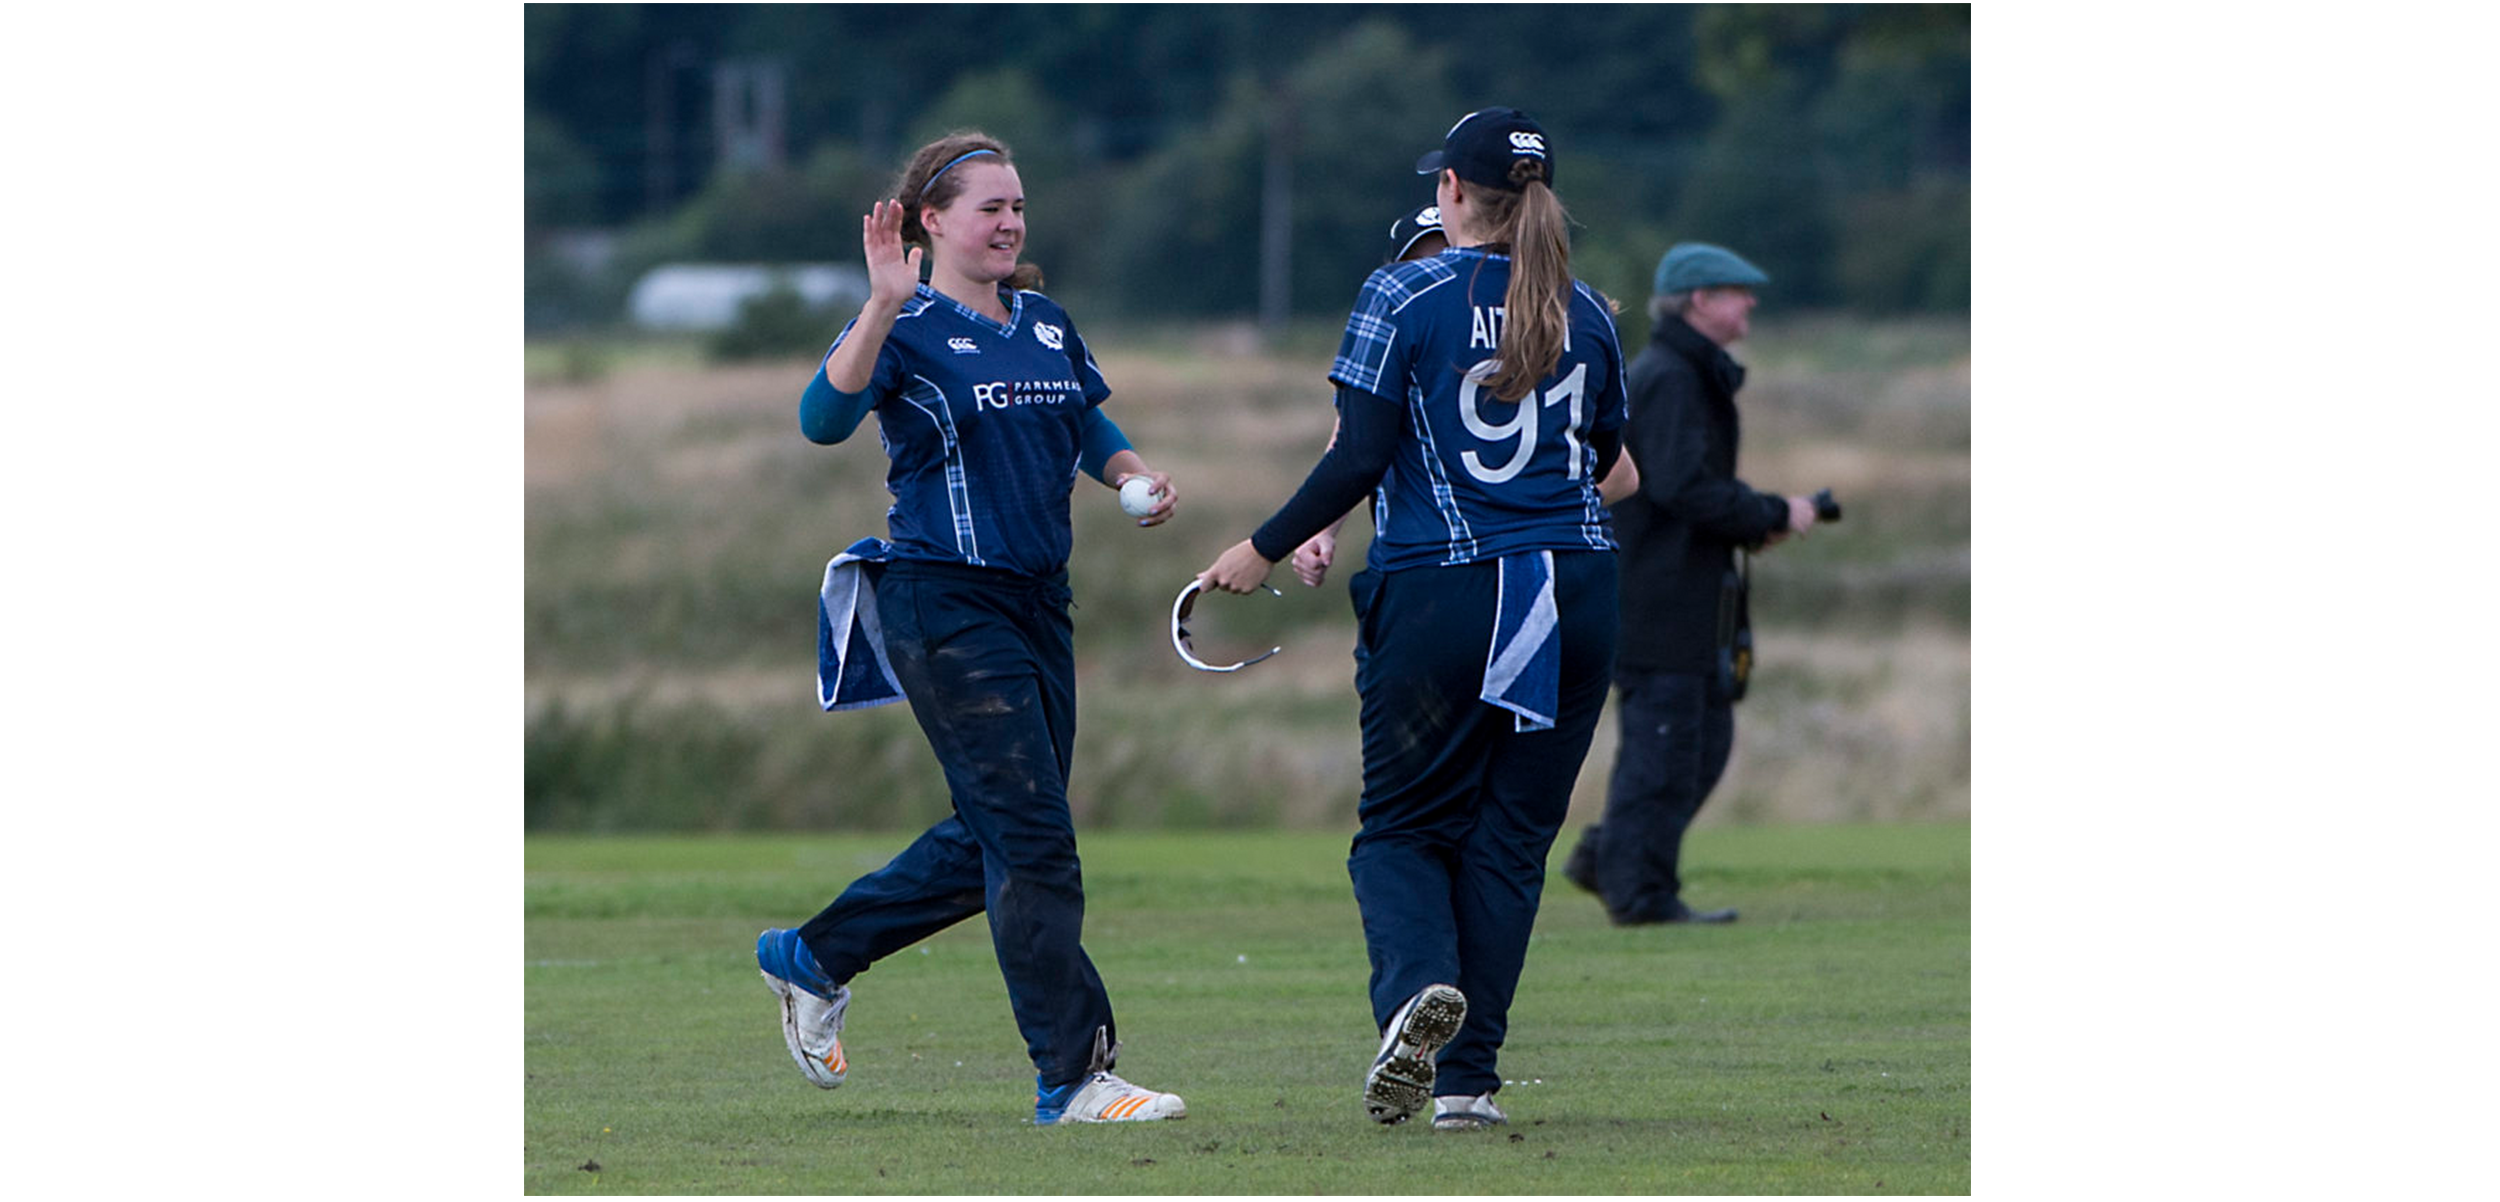 Cricket Scotland: International drought ends for Scotland as women take on Ireland in T20I series